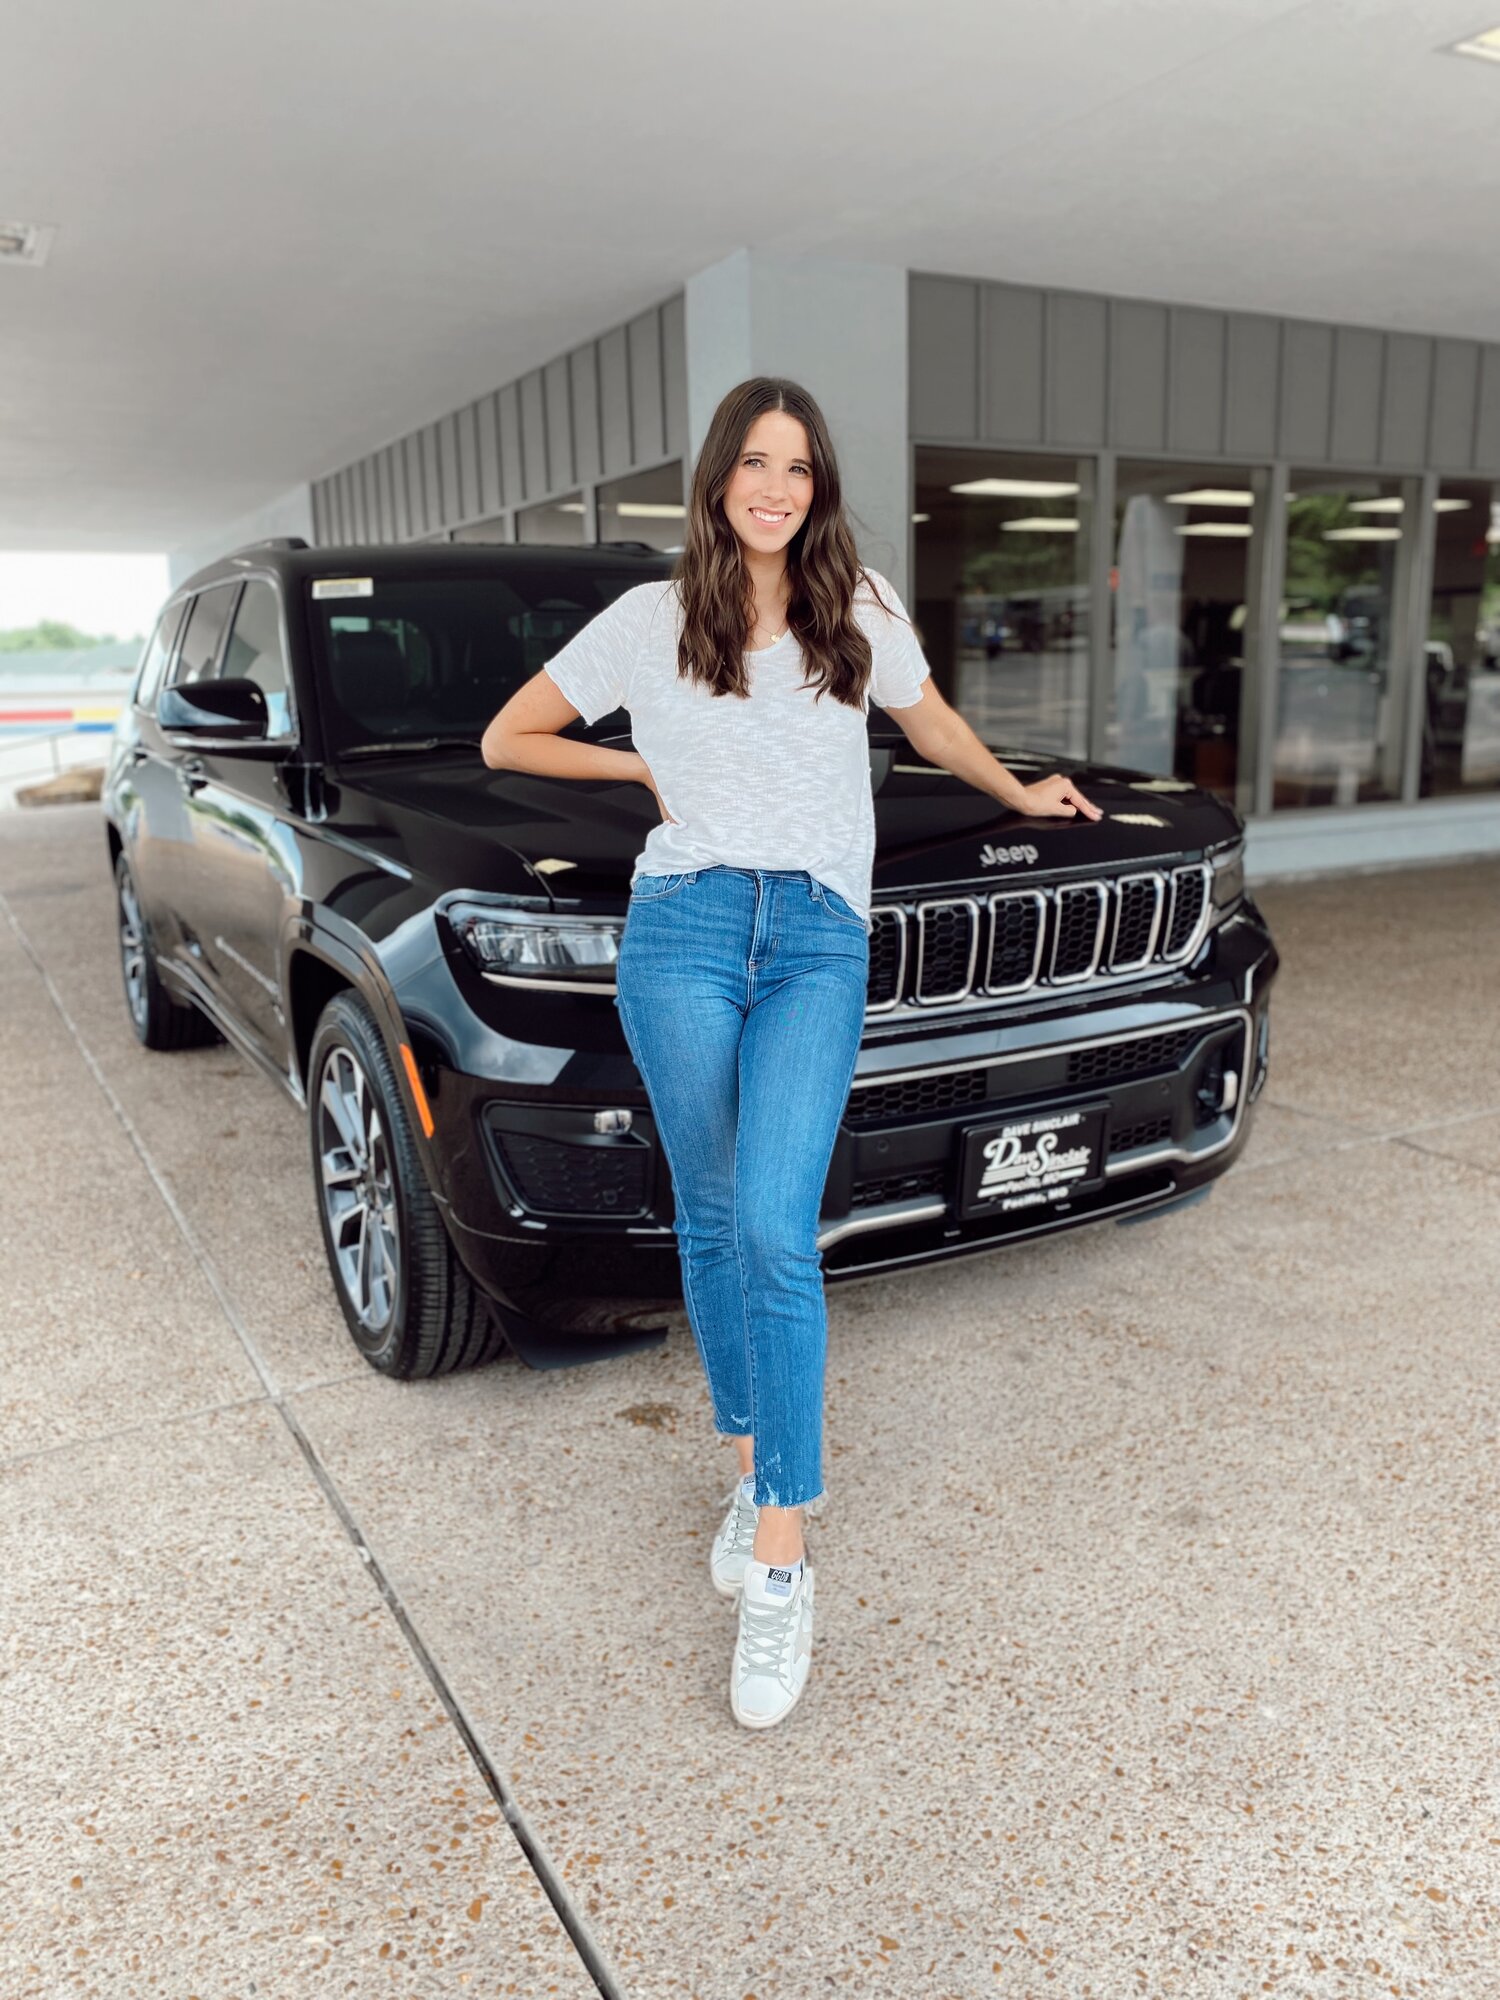 2021 Jeep grand Cherokee L Mom Car Review — The Car Mom | Car Reviews & Car  Buying Tips for Moms